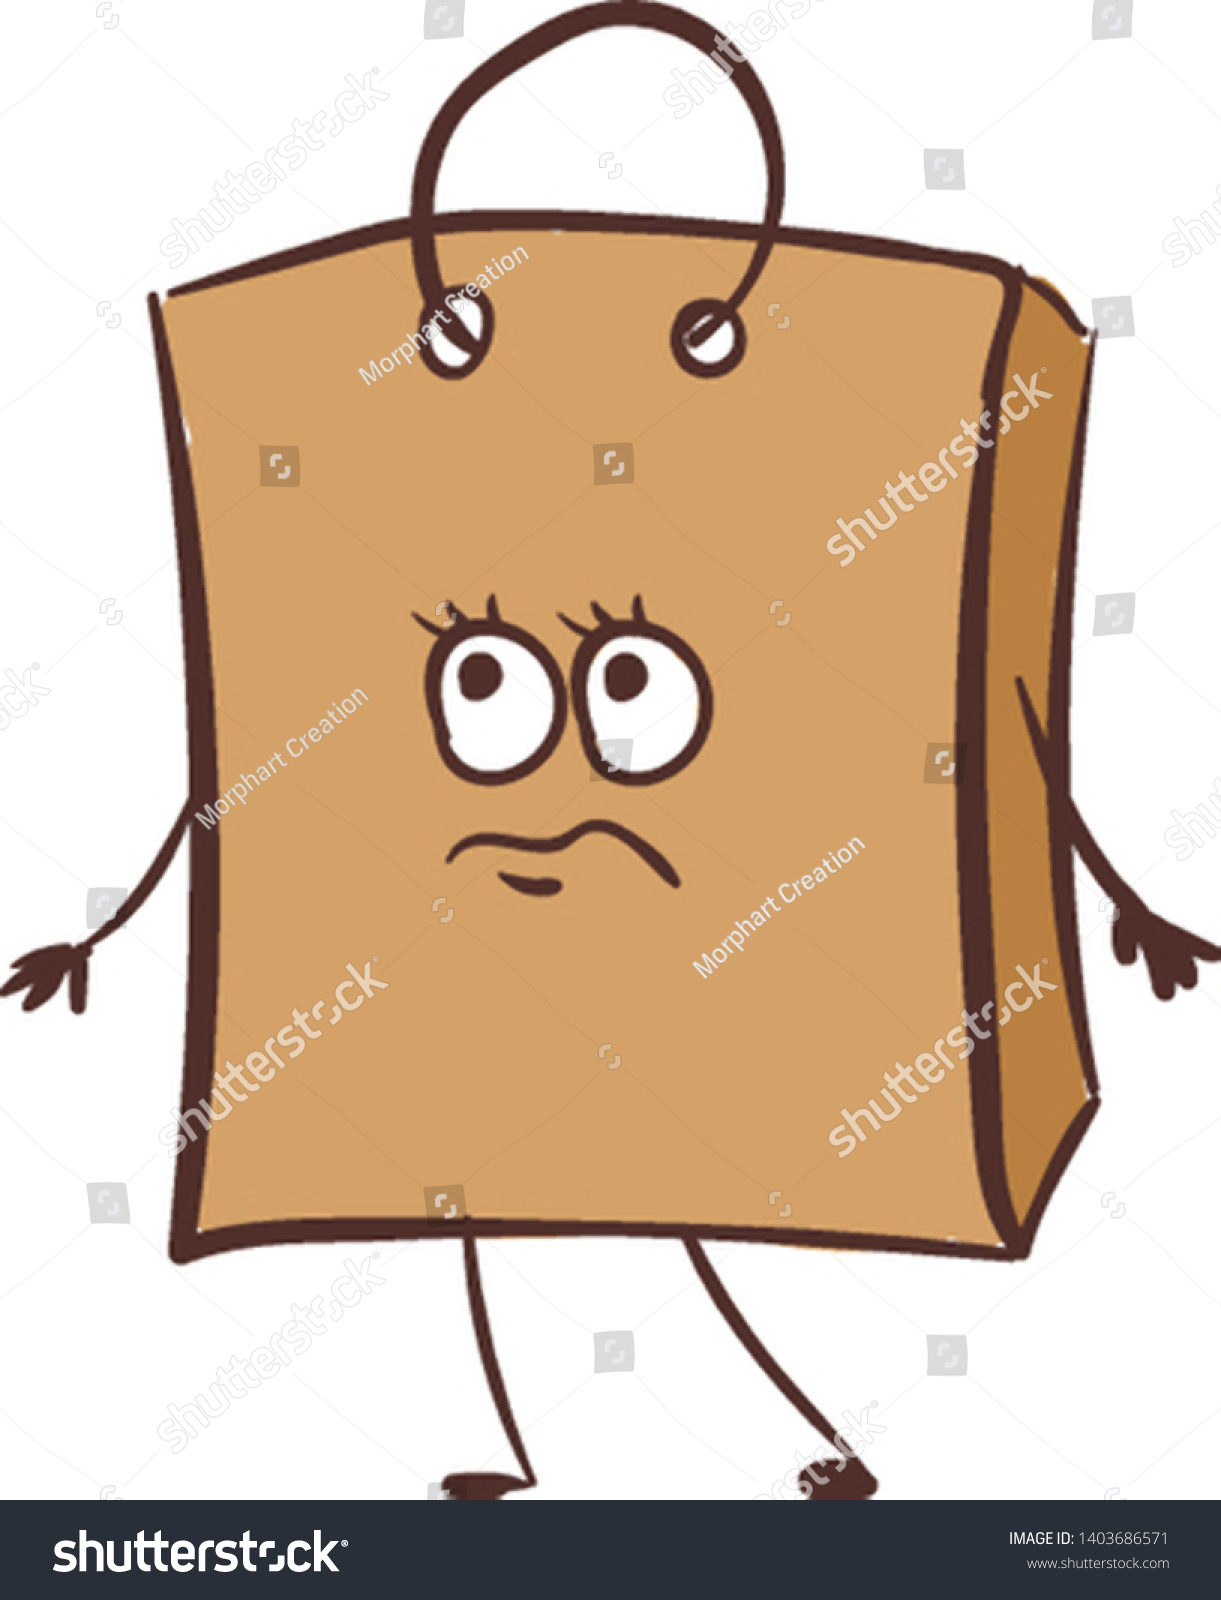 SVG of Emoji of a brown paper bag ideal for gift purposes or carrying light-weight clothes has a cute little face with eyes rolled up expresses sadness while standing, vector, color drawing or illustration. svg